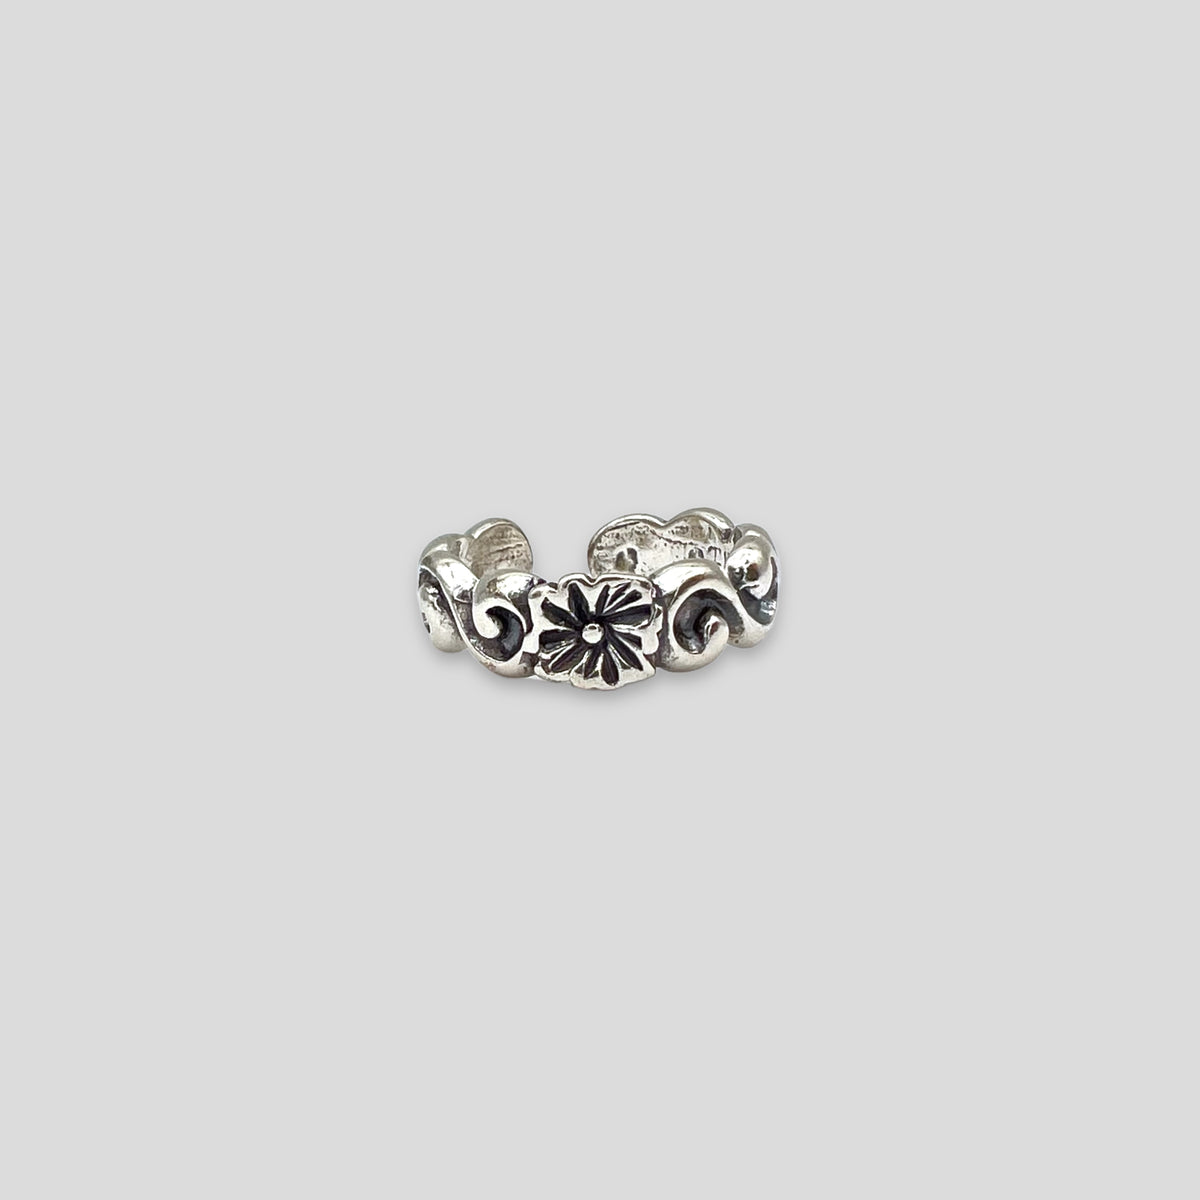 Flower Center with Waves Sterling Silver Toe Rings